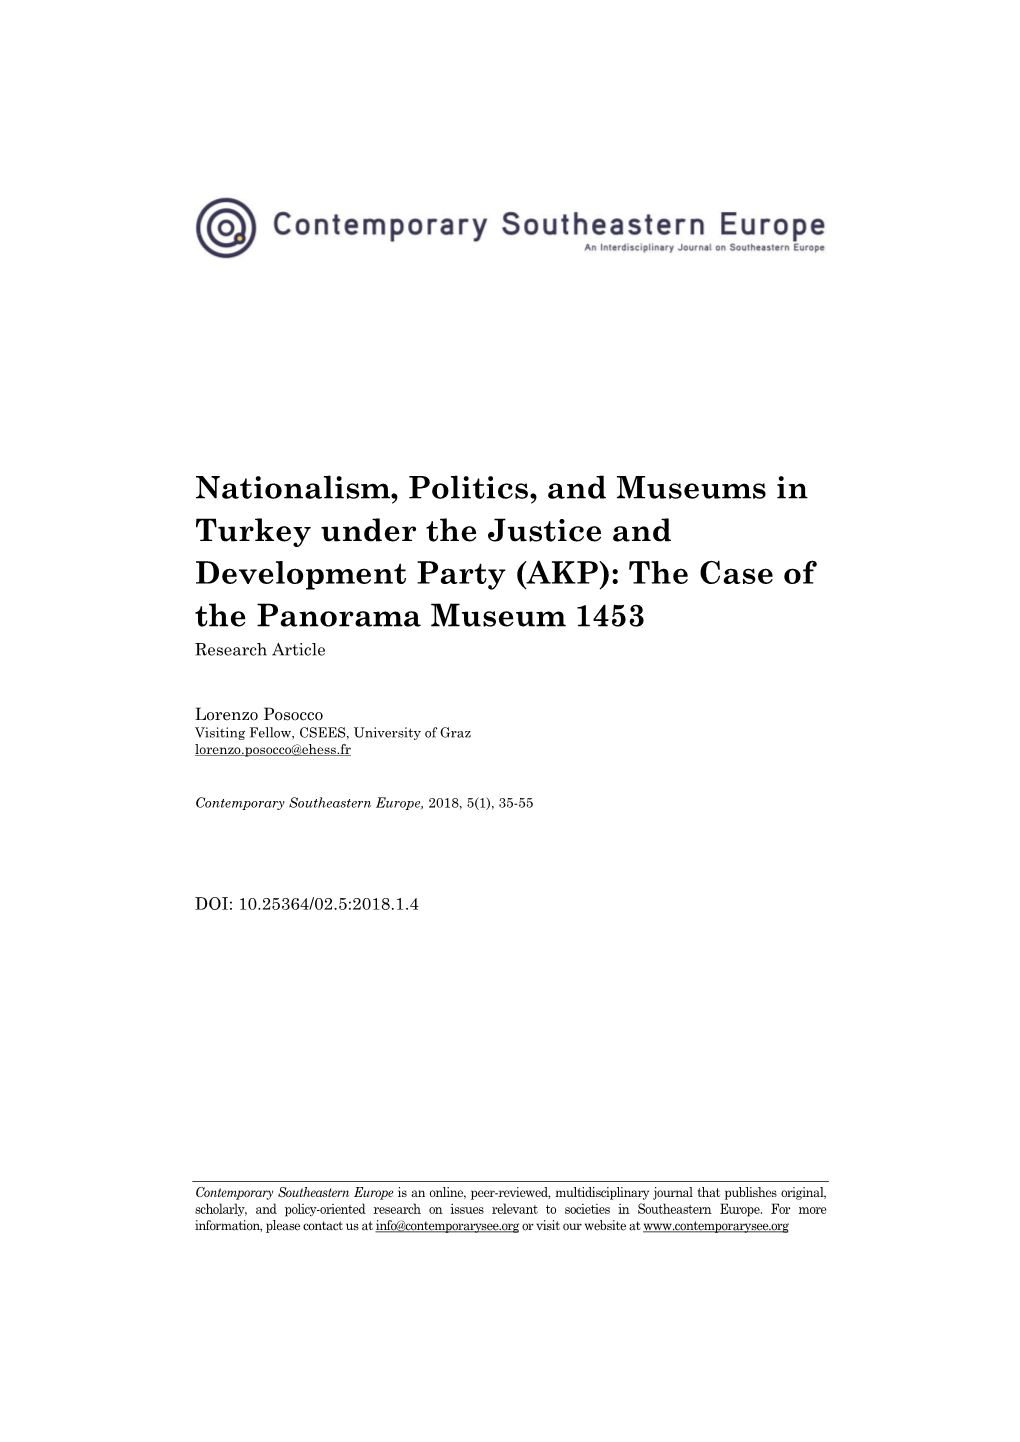 Nationalism, Politics, and Museums in Turkey Under the Justice and Development Party (AKP): the Case of the Panorama Museum 1453 Research Article